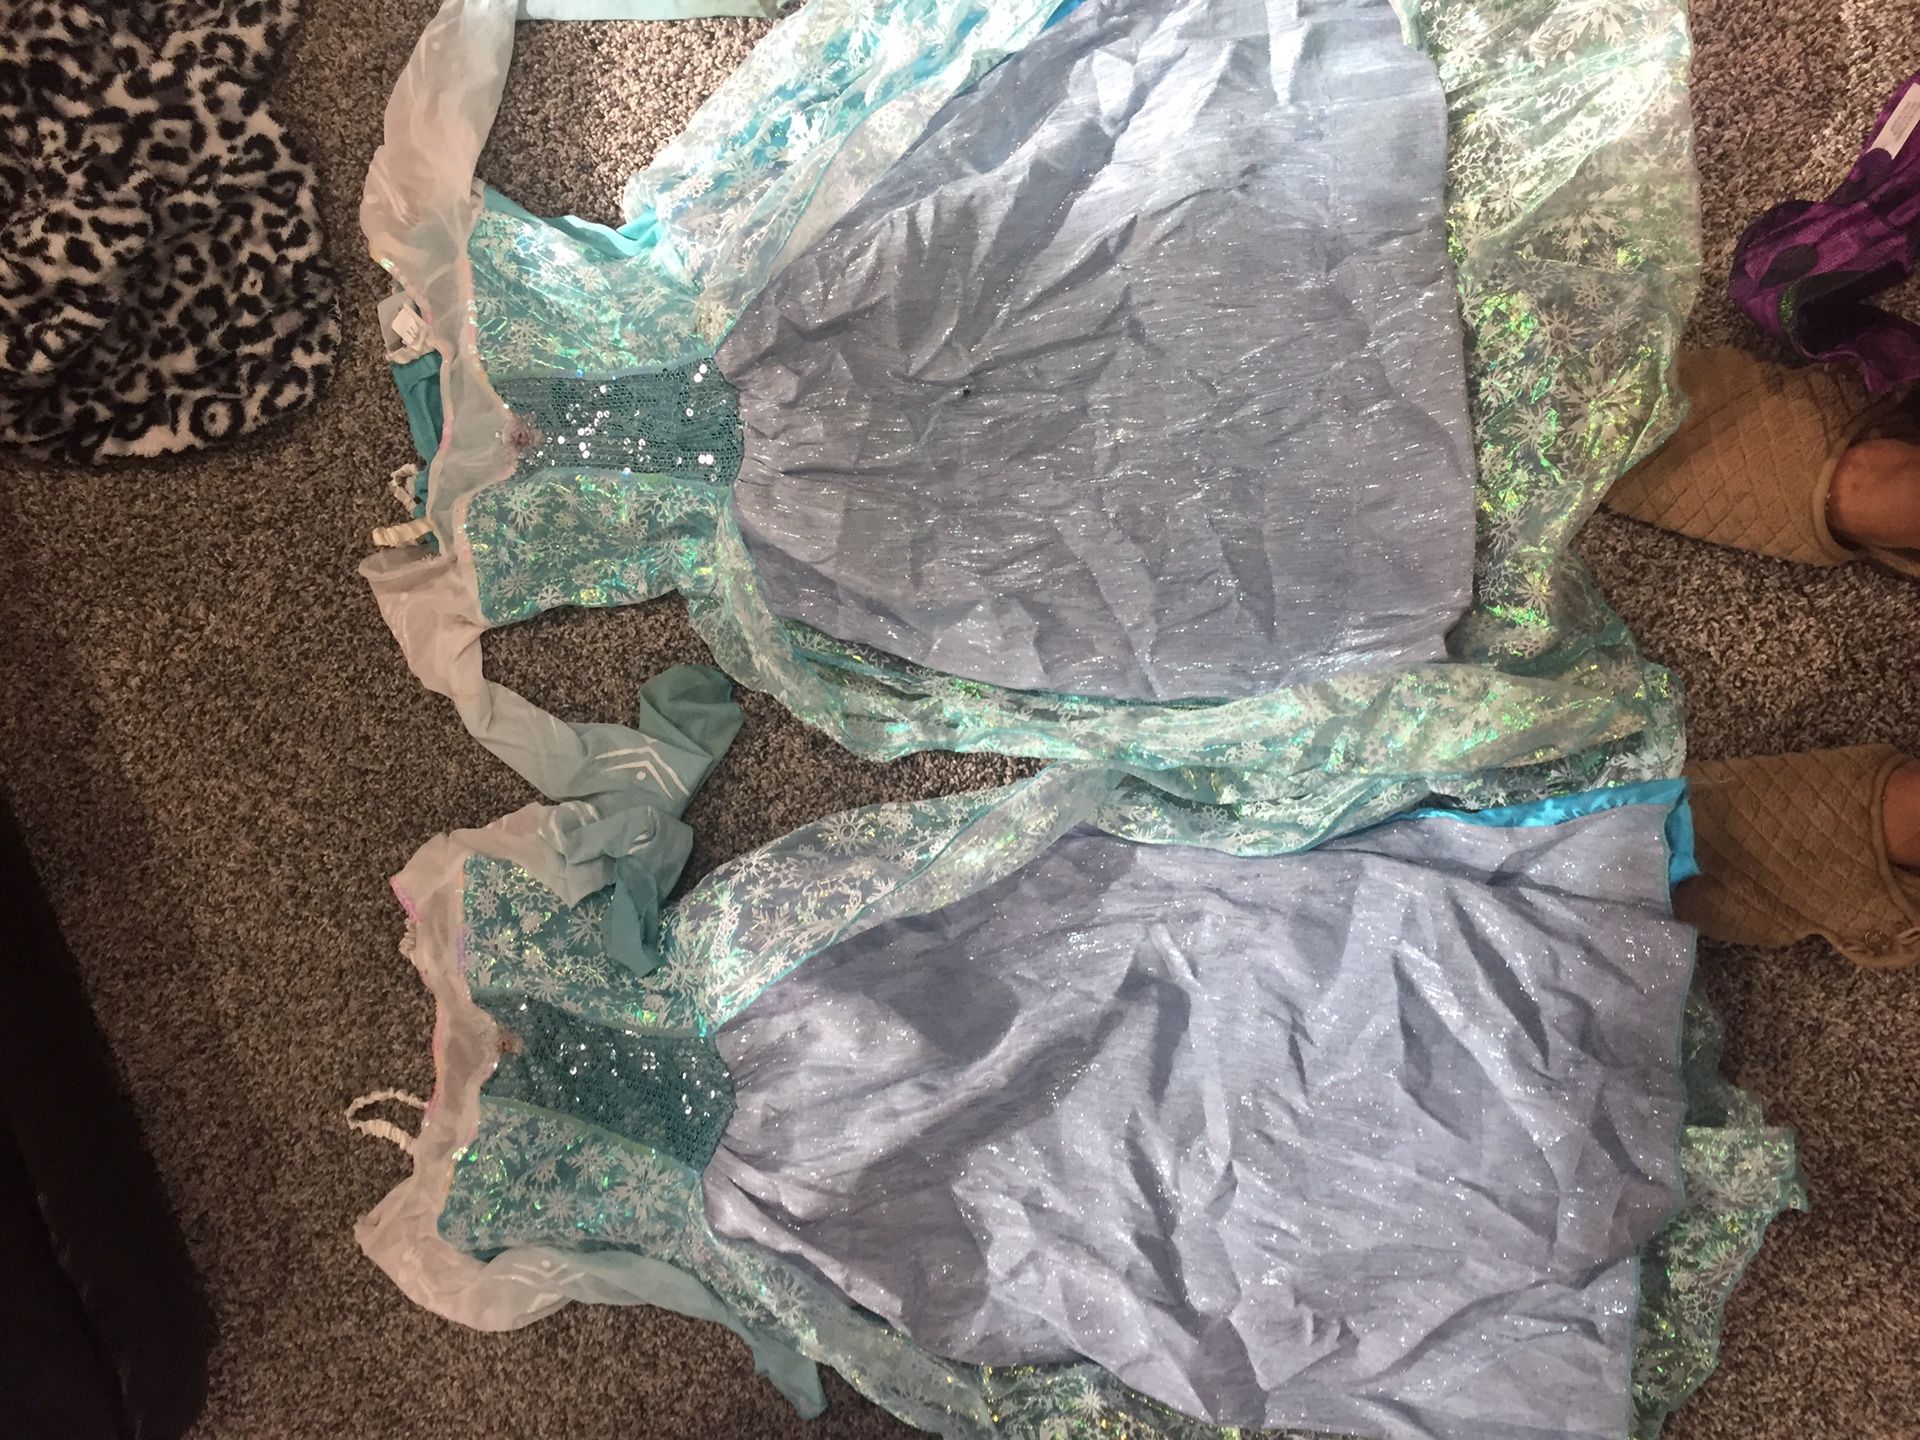 2 Elsa dress up costumes with wigs